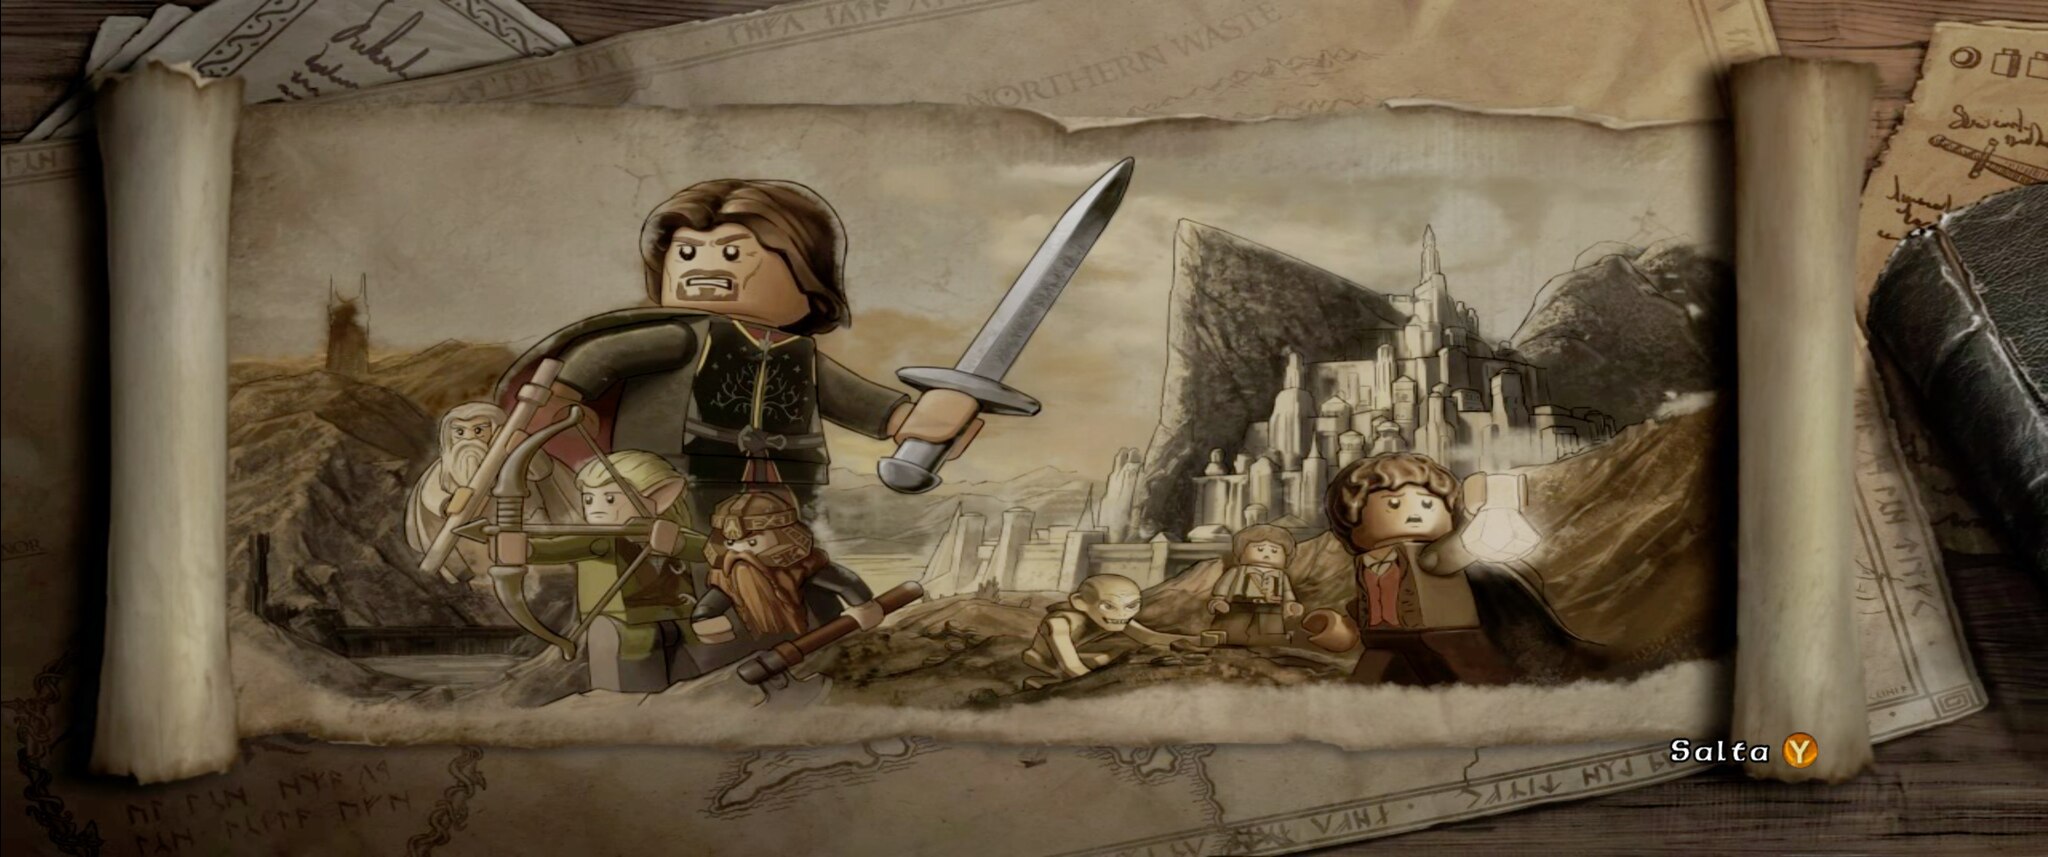 cheat codes for lego lord of the rings gondor ranger